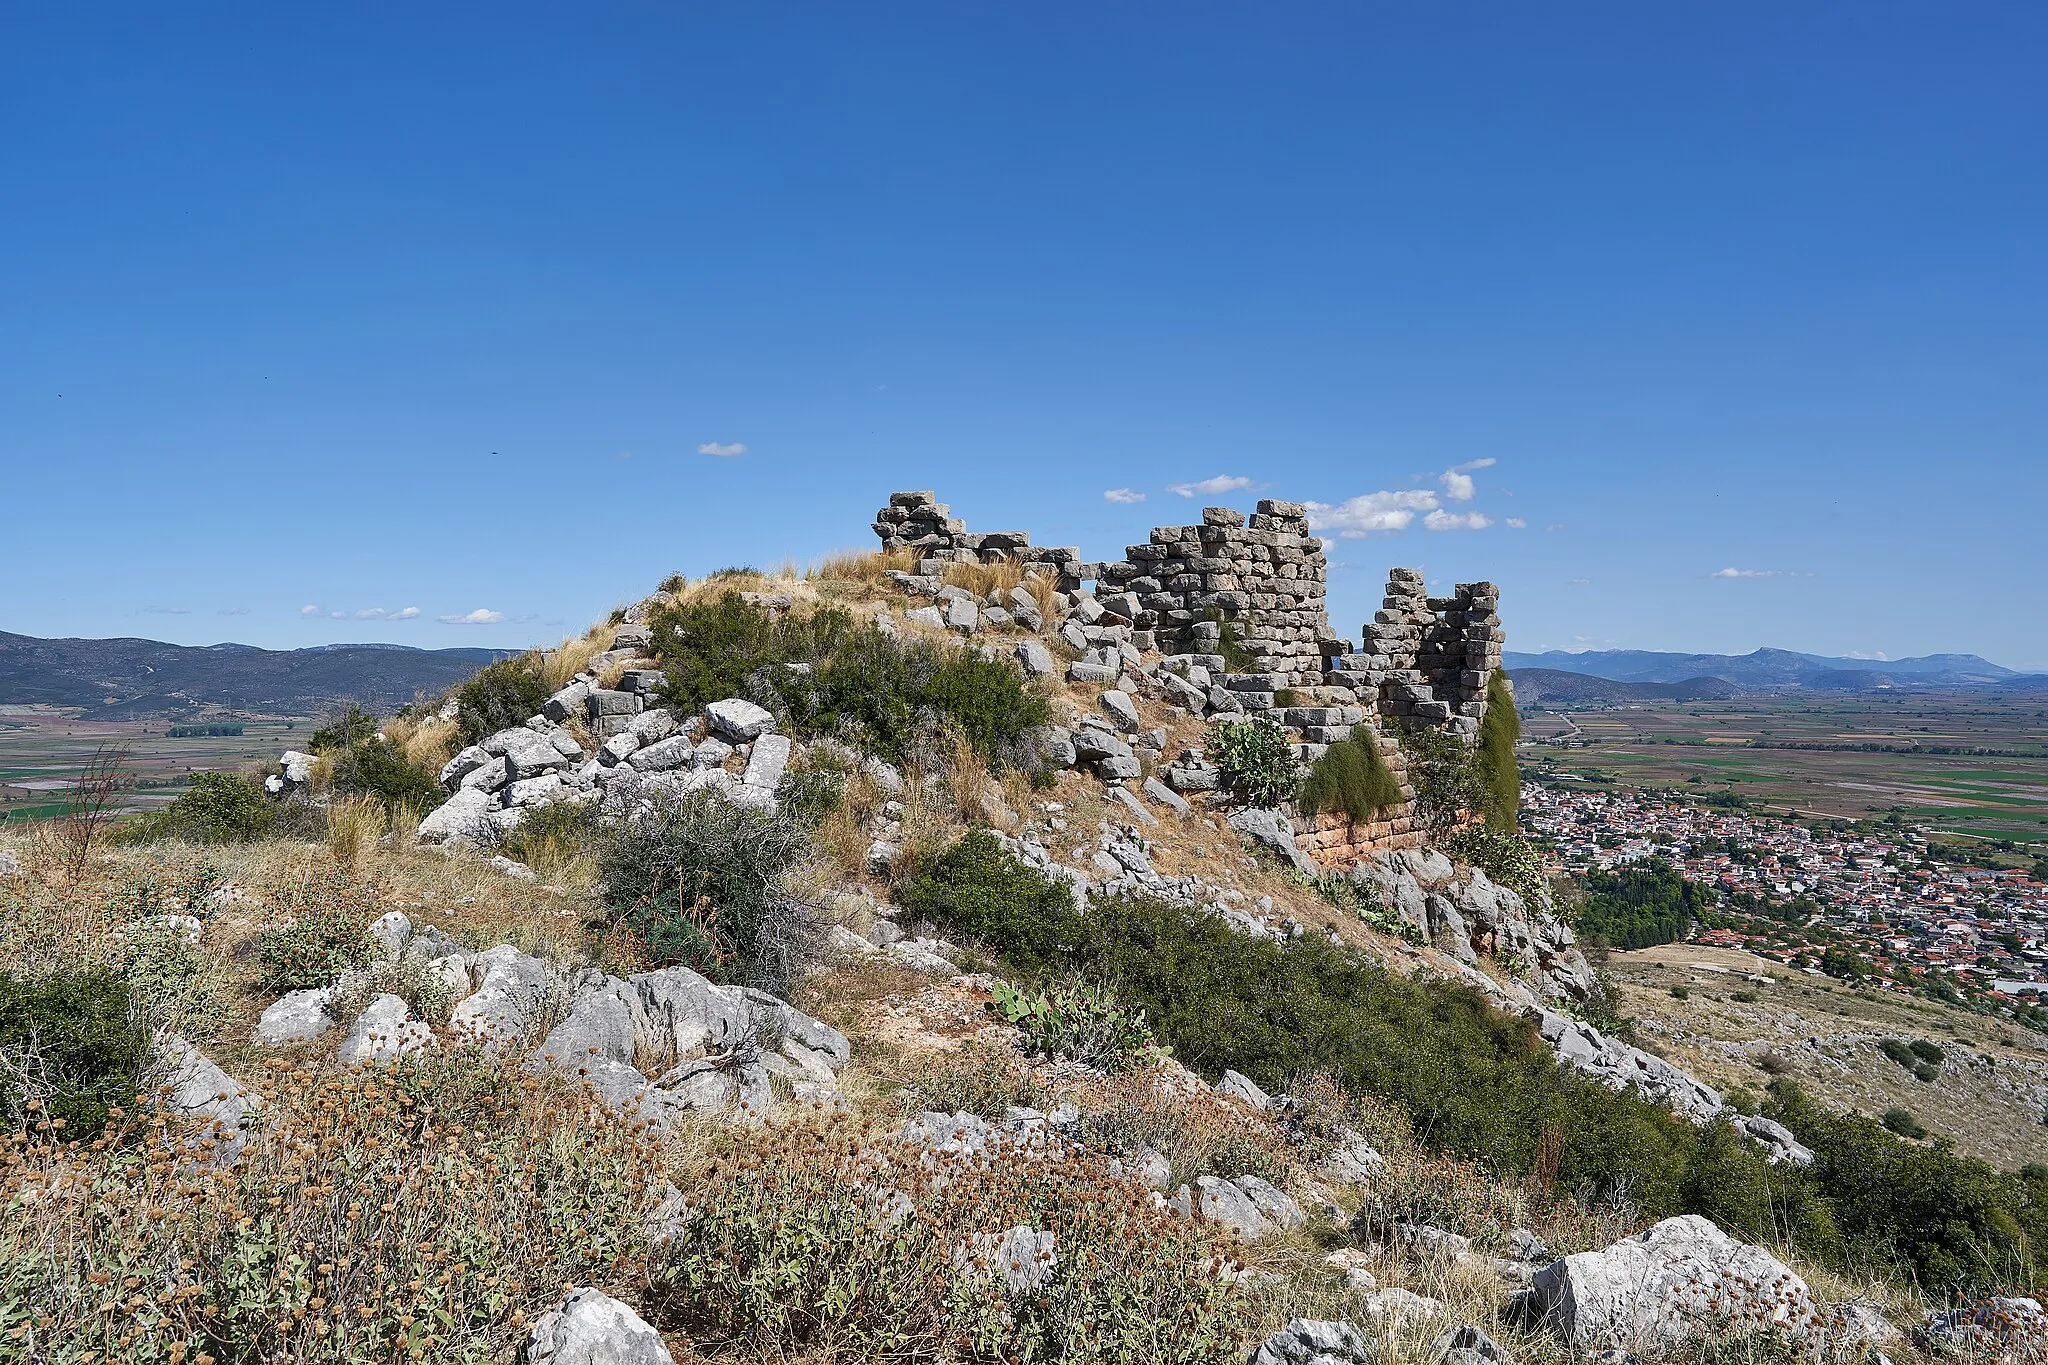 Photo showing: The derelict state of the tower on the top of the Acropolis of Orchomenus on September 30, 2020